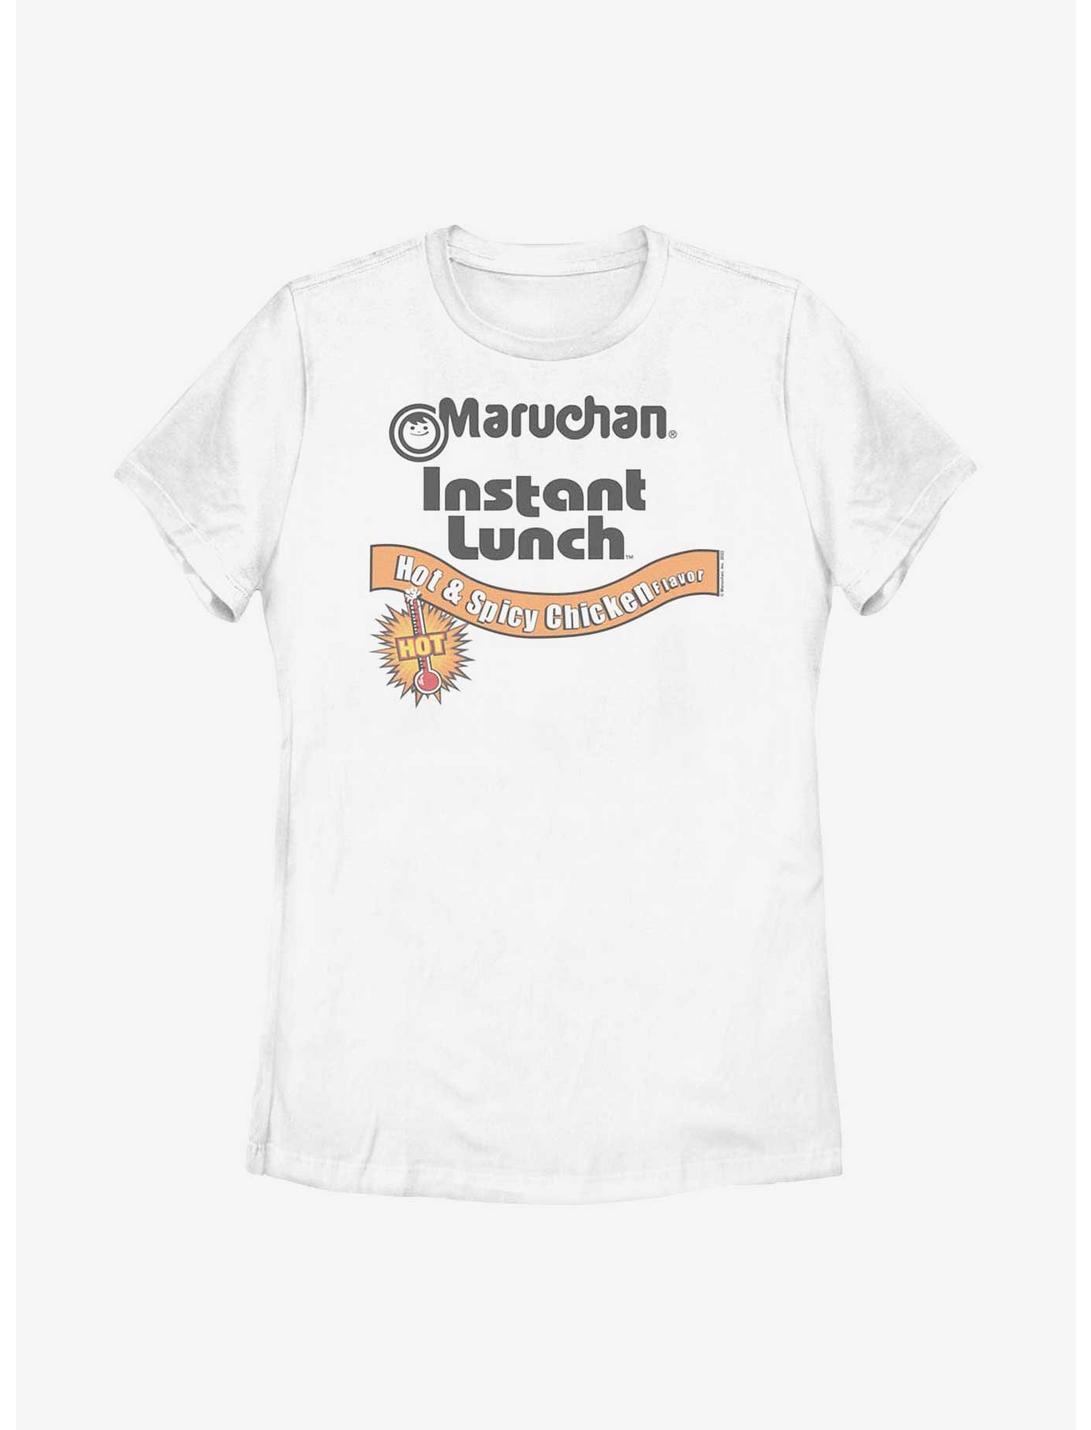 Maruchan Hot And Spicy Chicken Womens T-Shirt, WHITE, hi-res